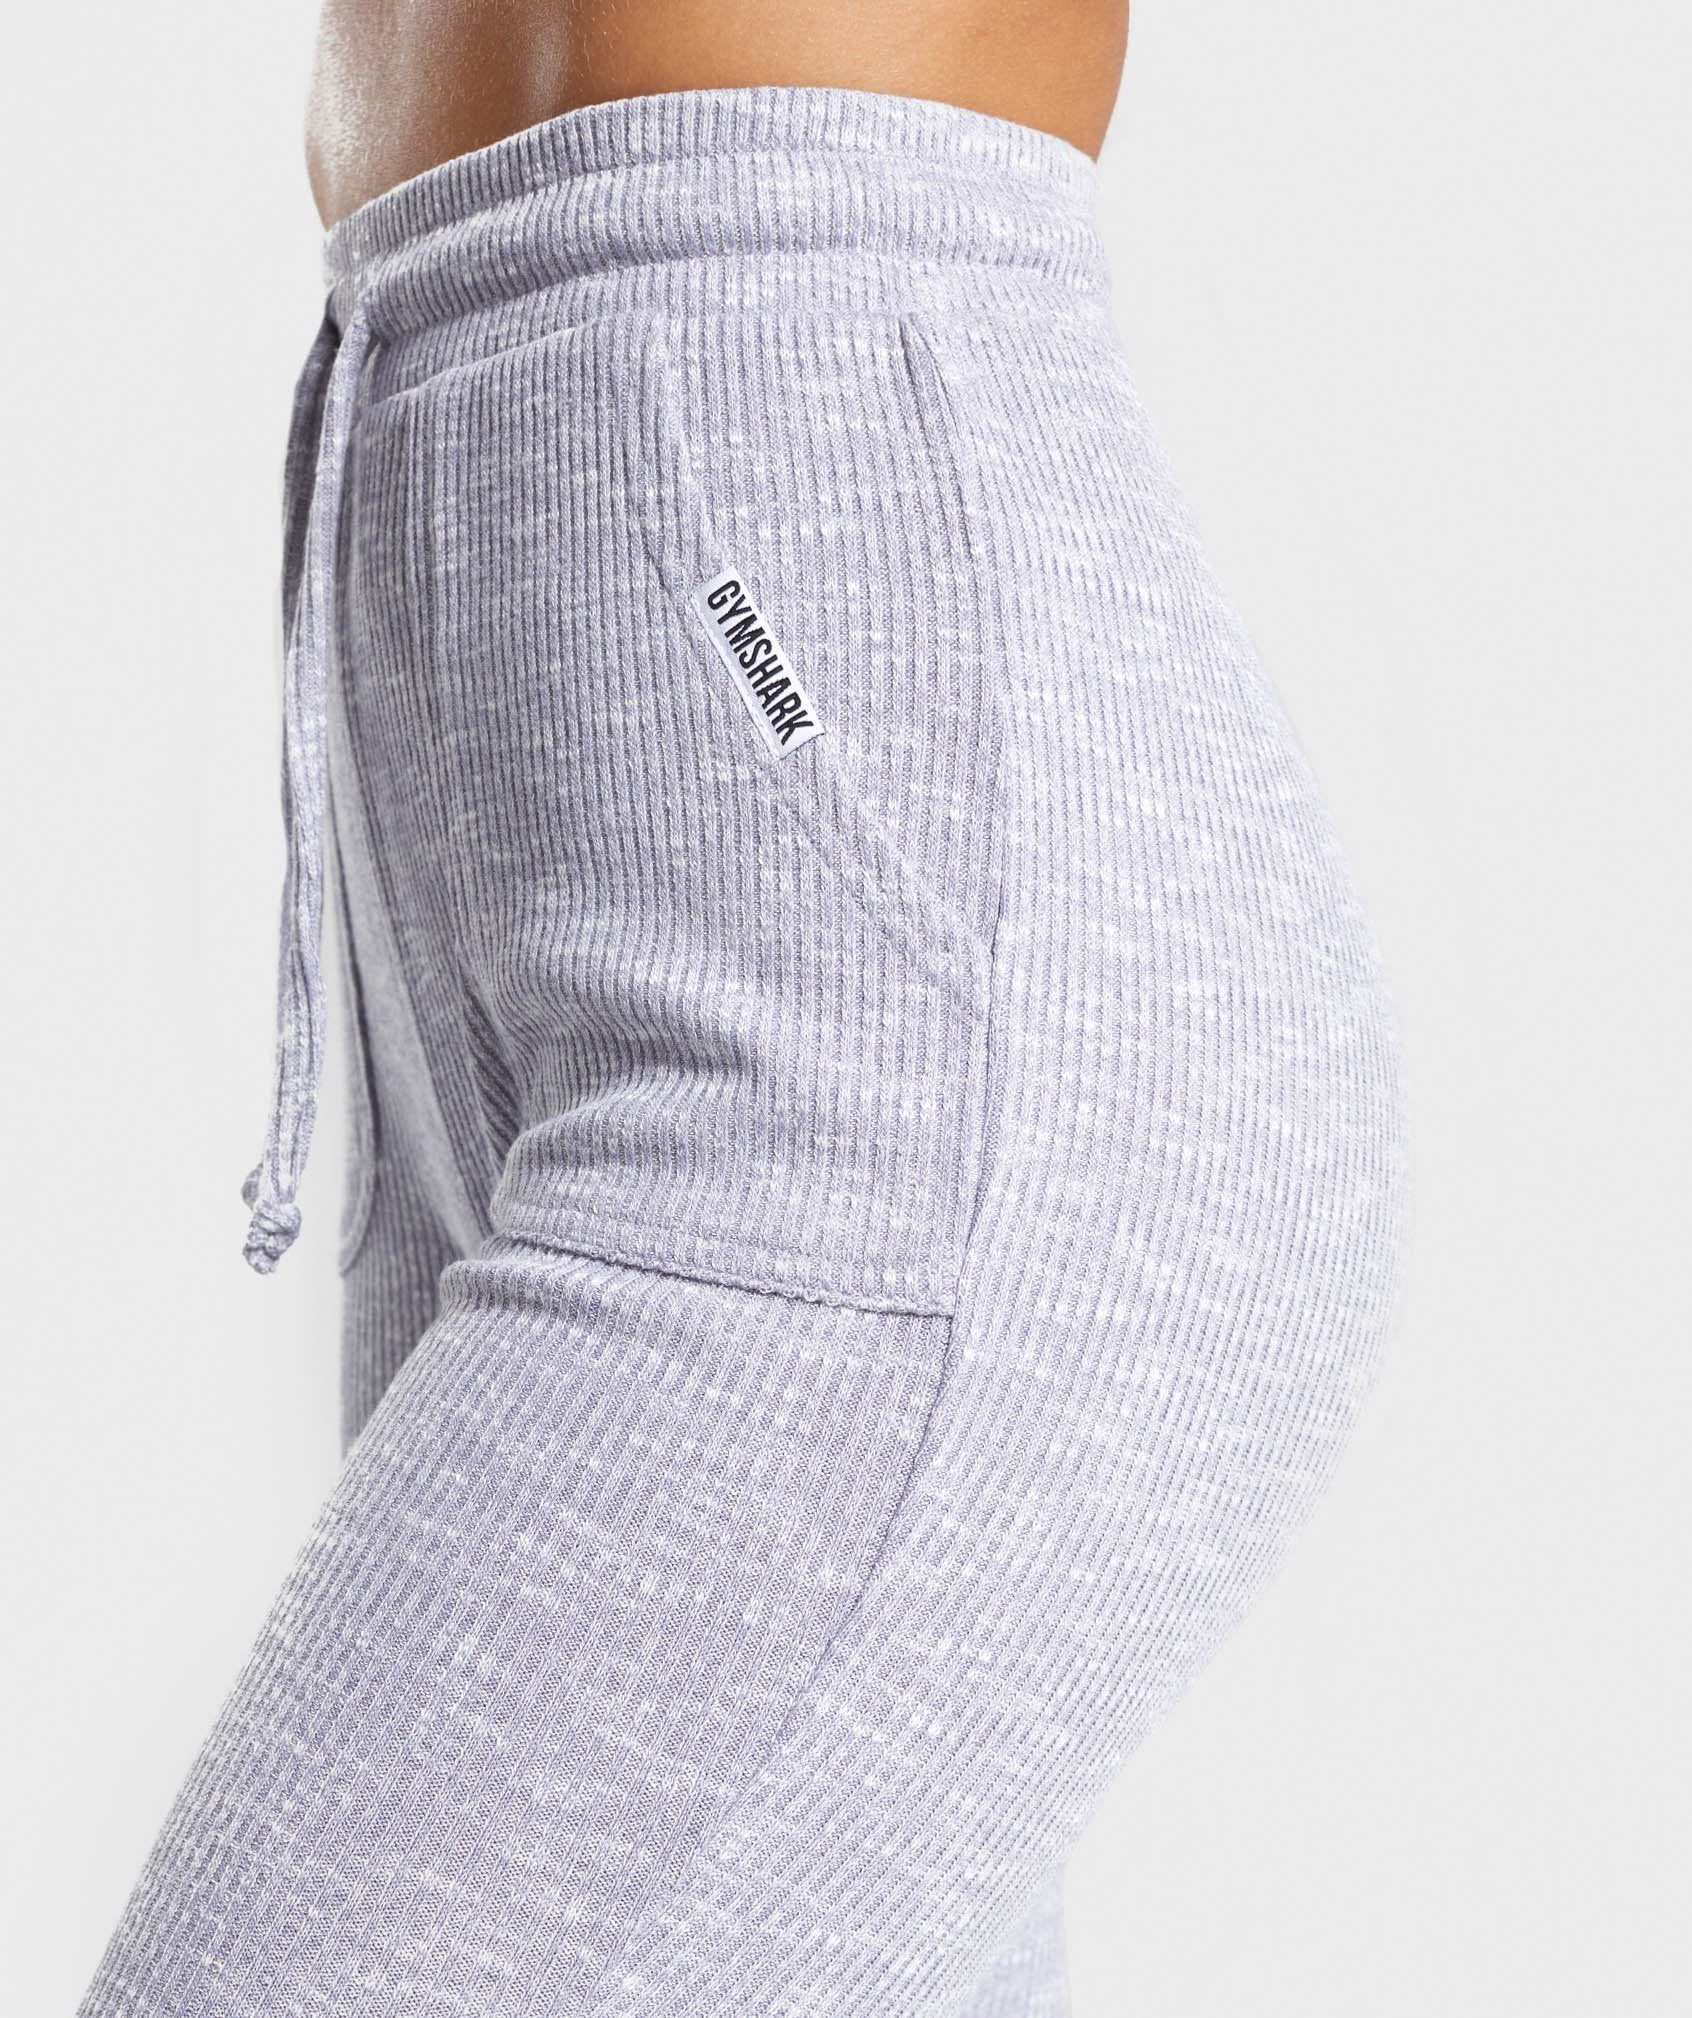 Slounge Leggings in Lilac Marl - view 4